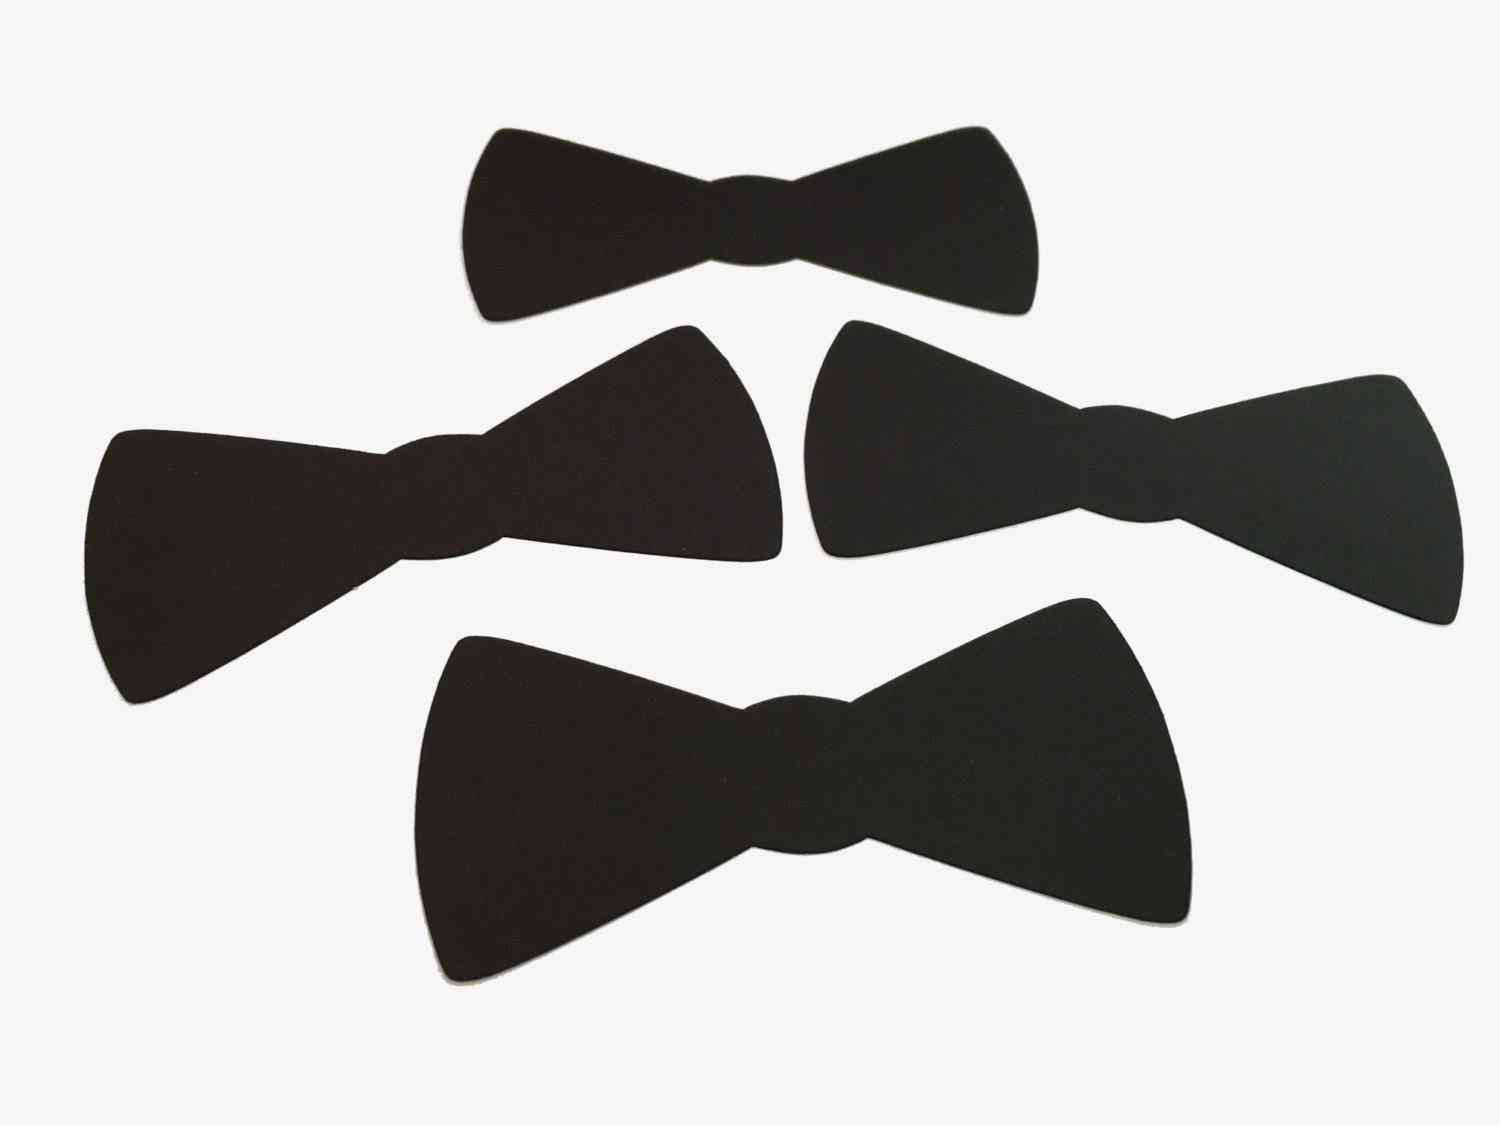 Bow Tie Die Cuts set of 25 2 8 Inch Bow Tie Cut Outs